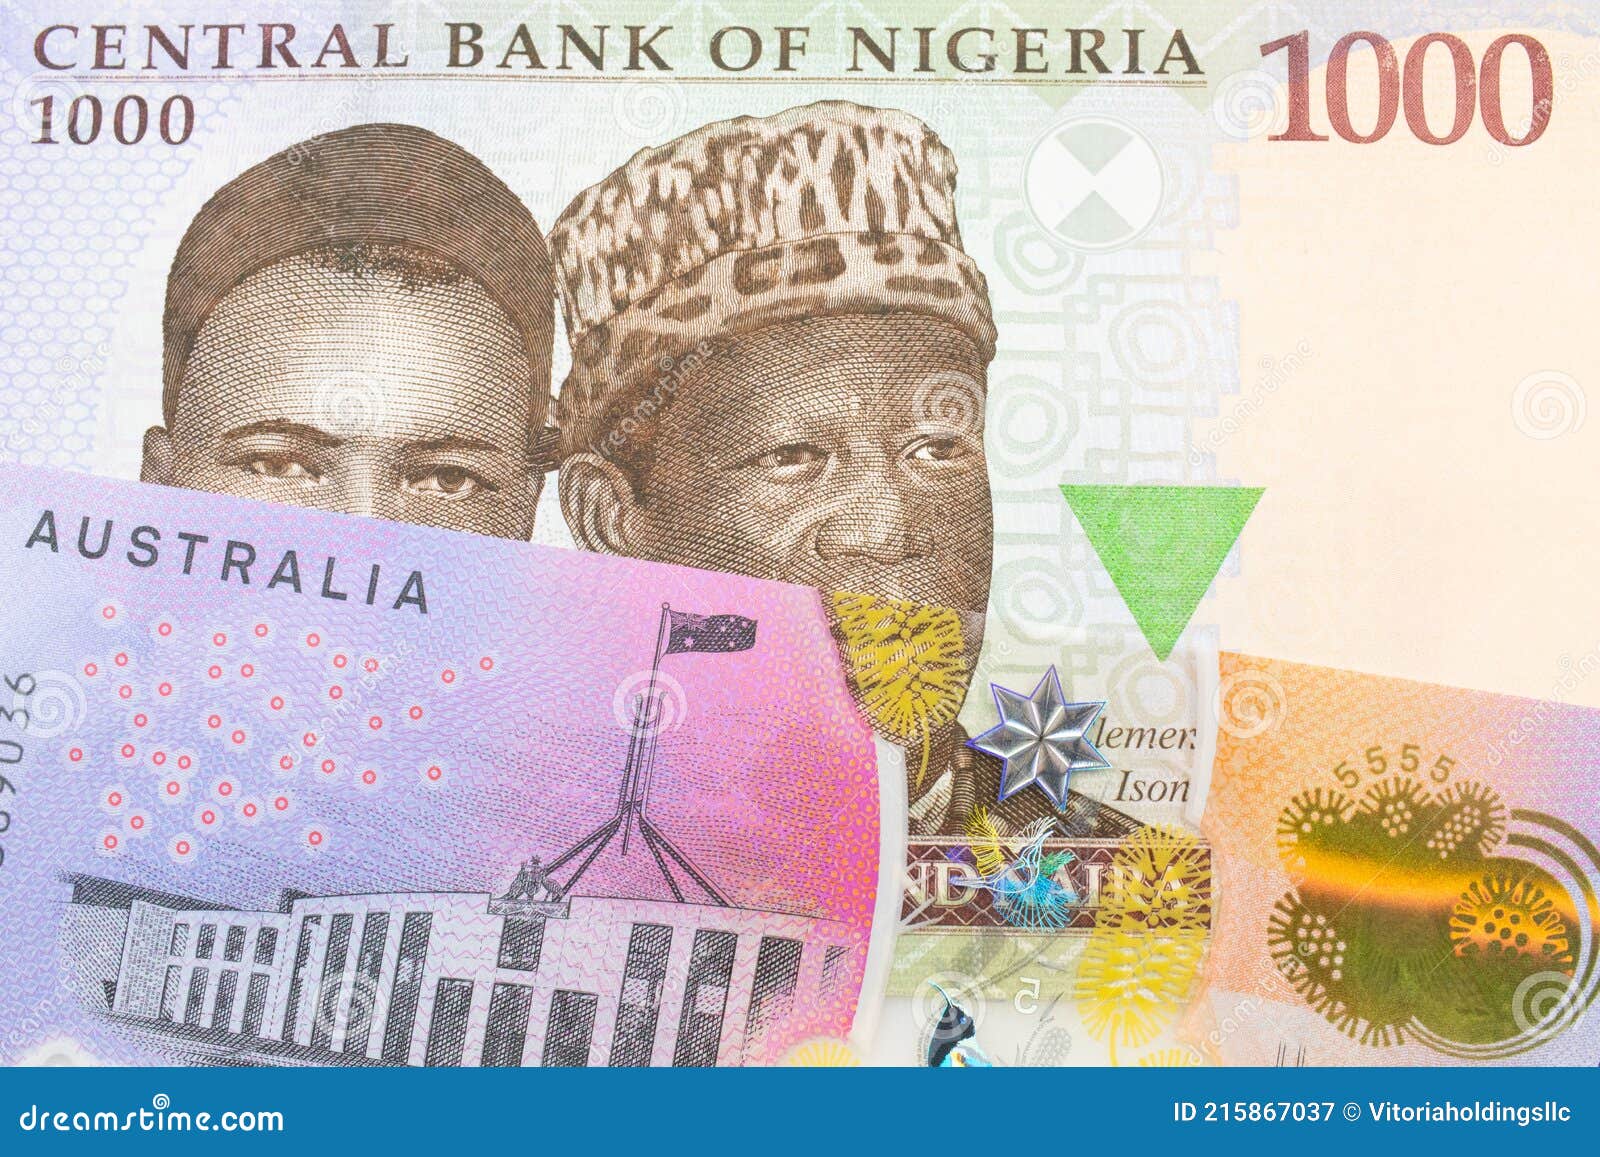 A Blue, Purple and Green One Thousand Note from Nigeria Paired with a Colorful Five Dollar Bill from Australia. Stock Image - Image of canberra, australian: 215867037